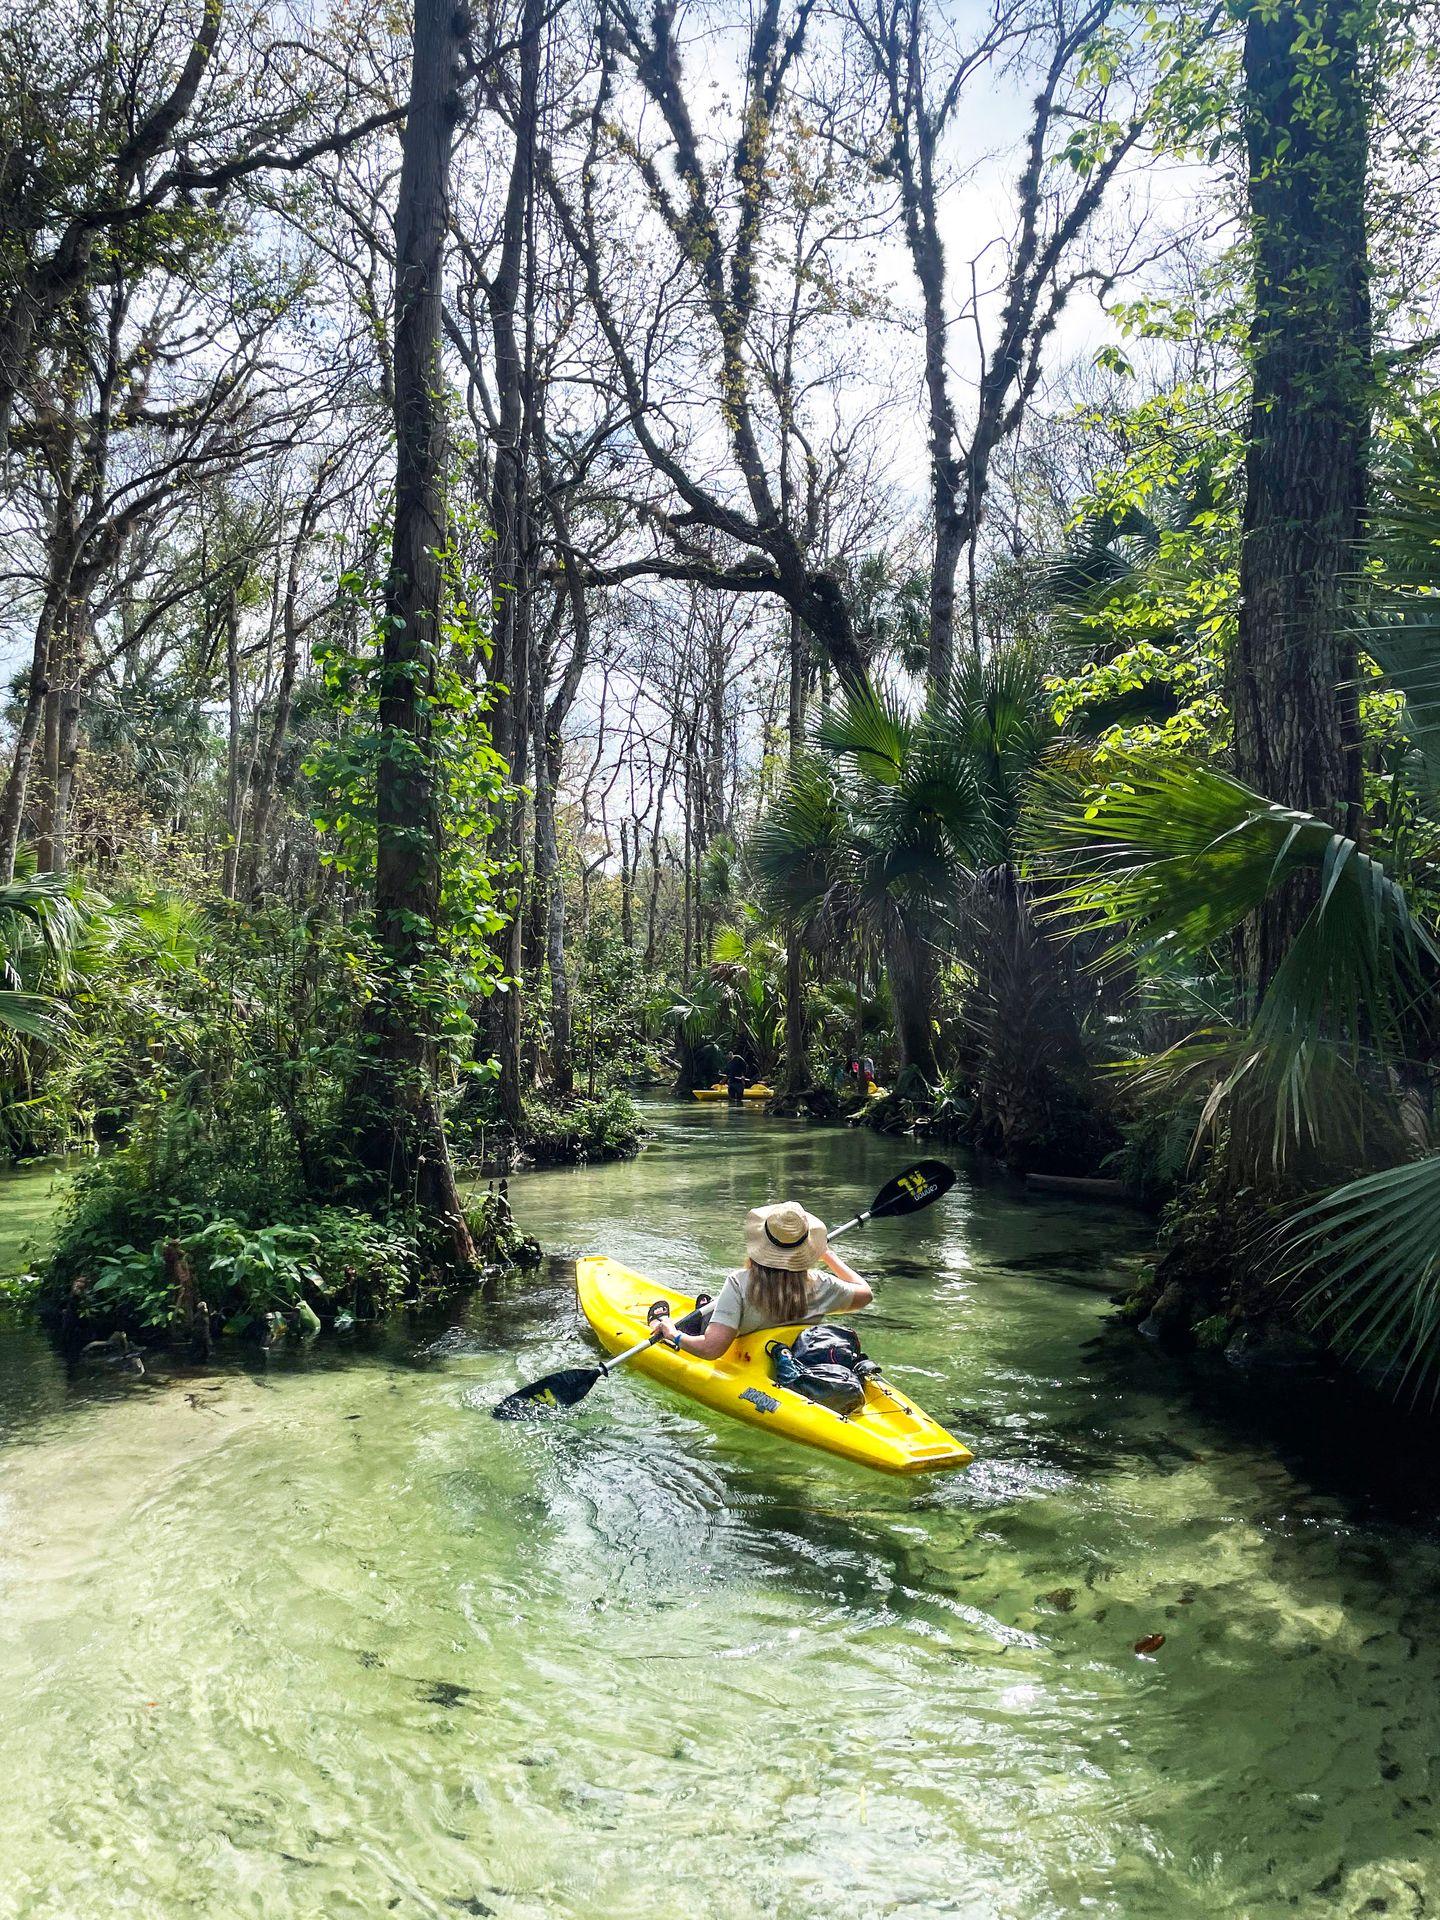 Lydia sitting in a yellow kayak. She kayaks through a narrow waterway surrounded by green palms.